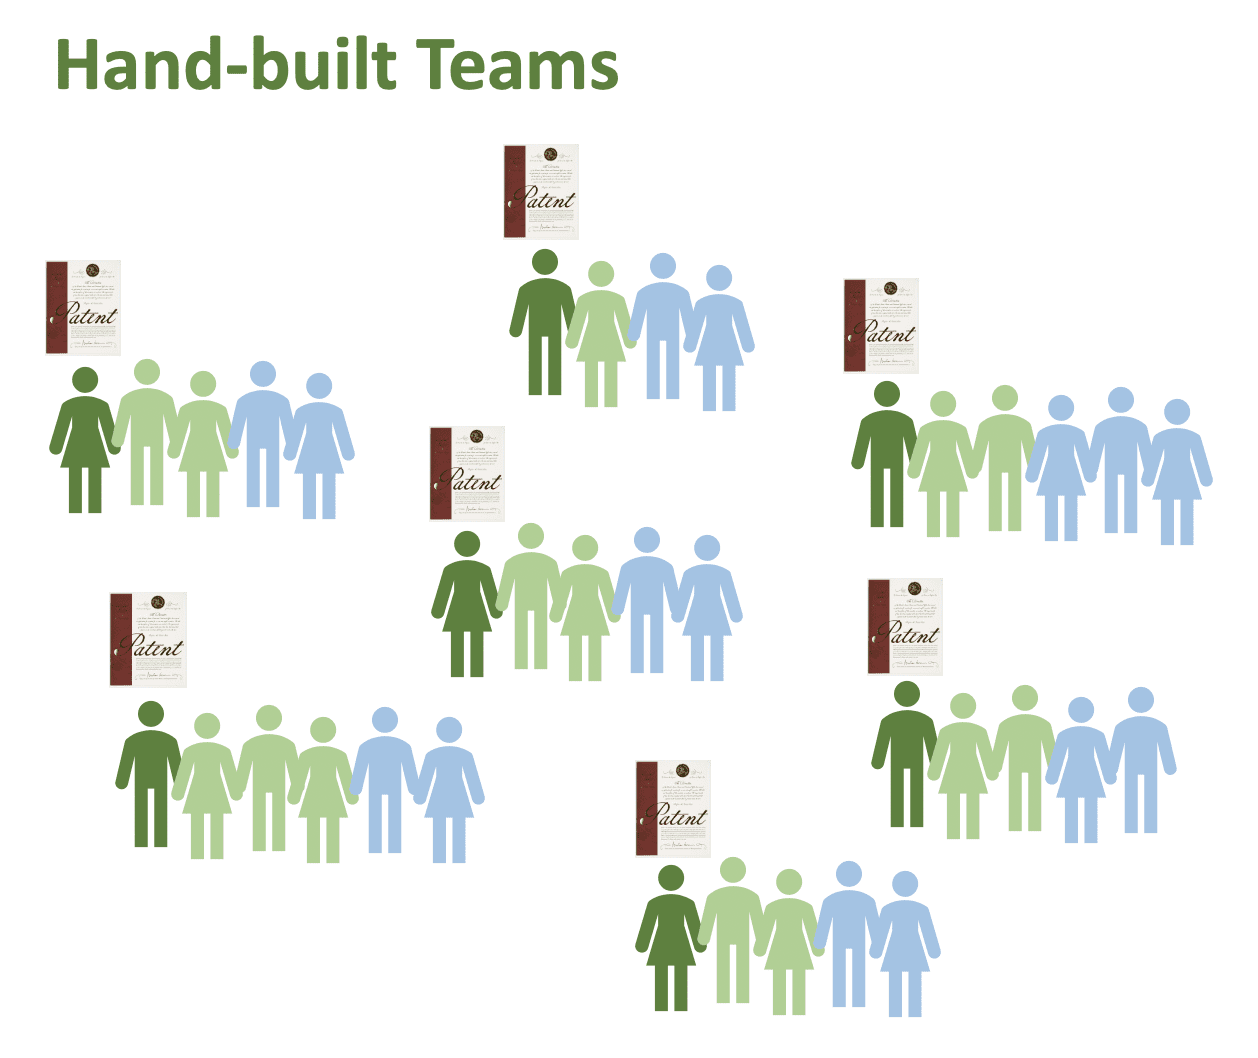 Graphic depicting C2M's hand-built teams comprising students from different backgrounds